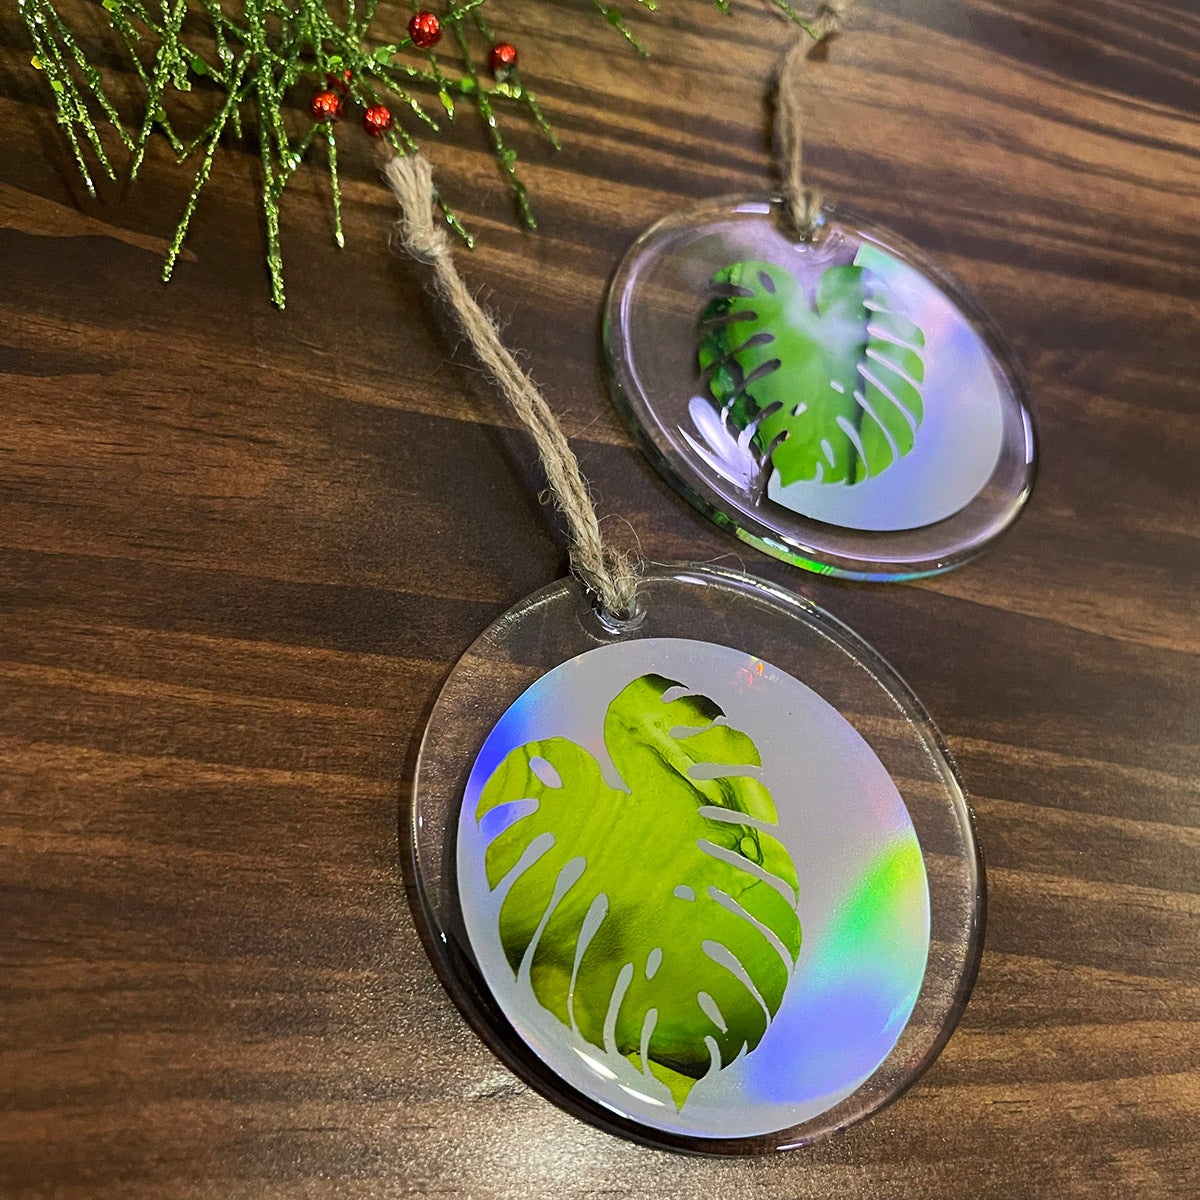 monstera leaf holiday ornaments silver rainbow holographic handmade plant gifts